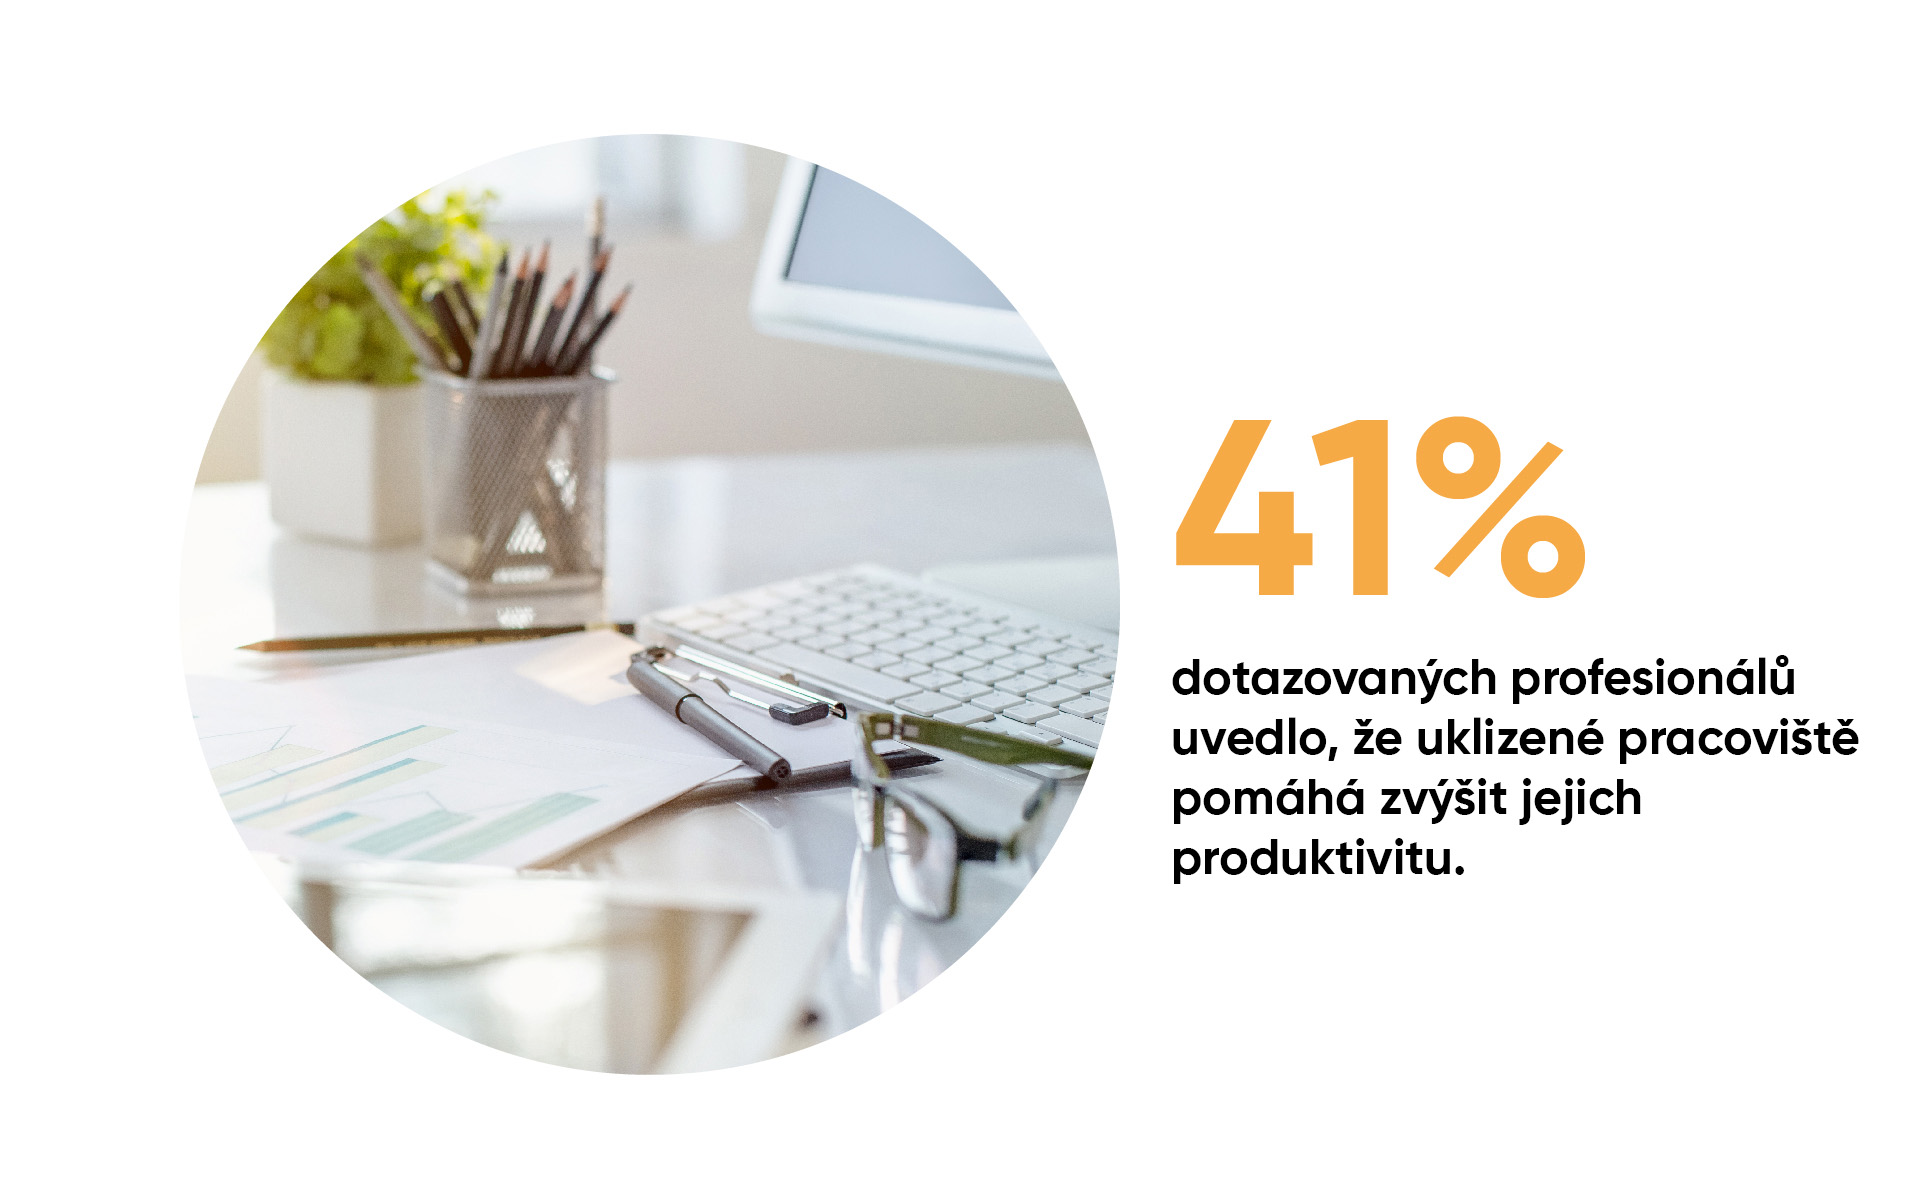 41% of surveyed professionals said that a tidy workplace helps improve productivity